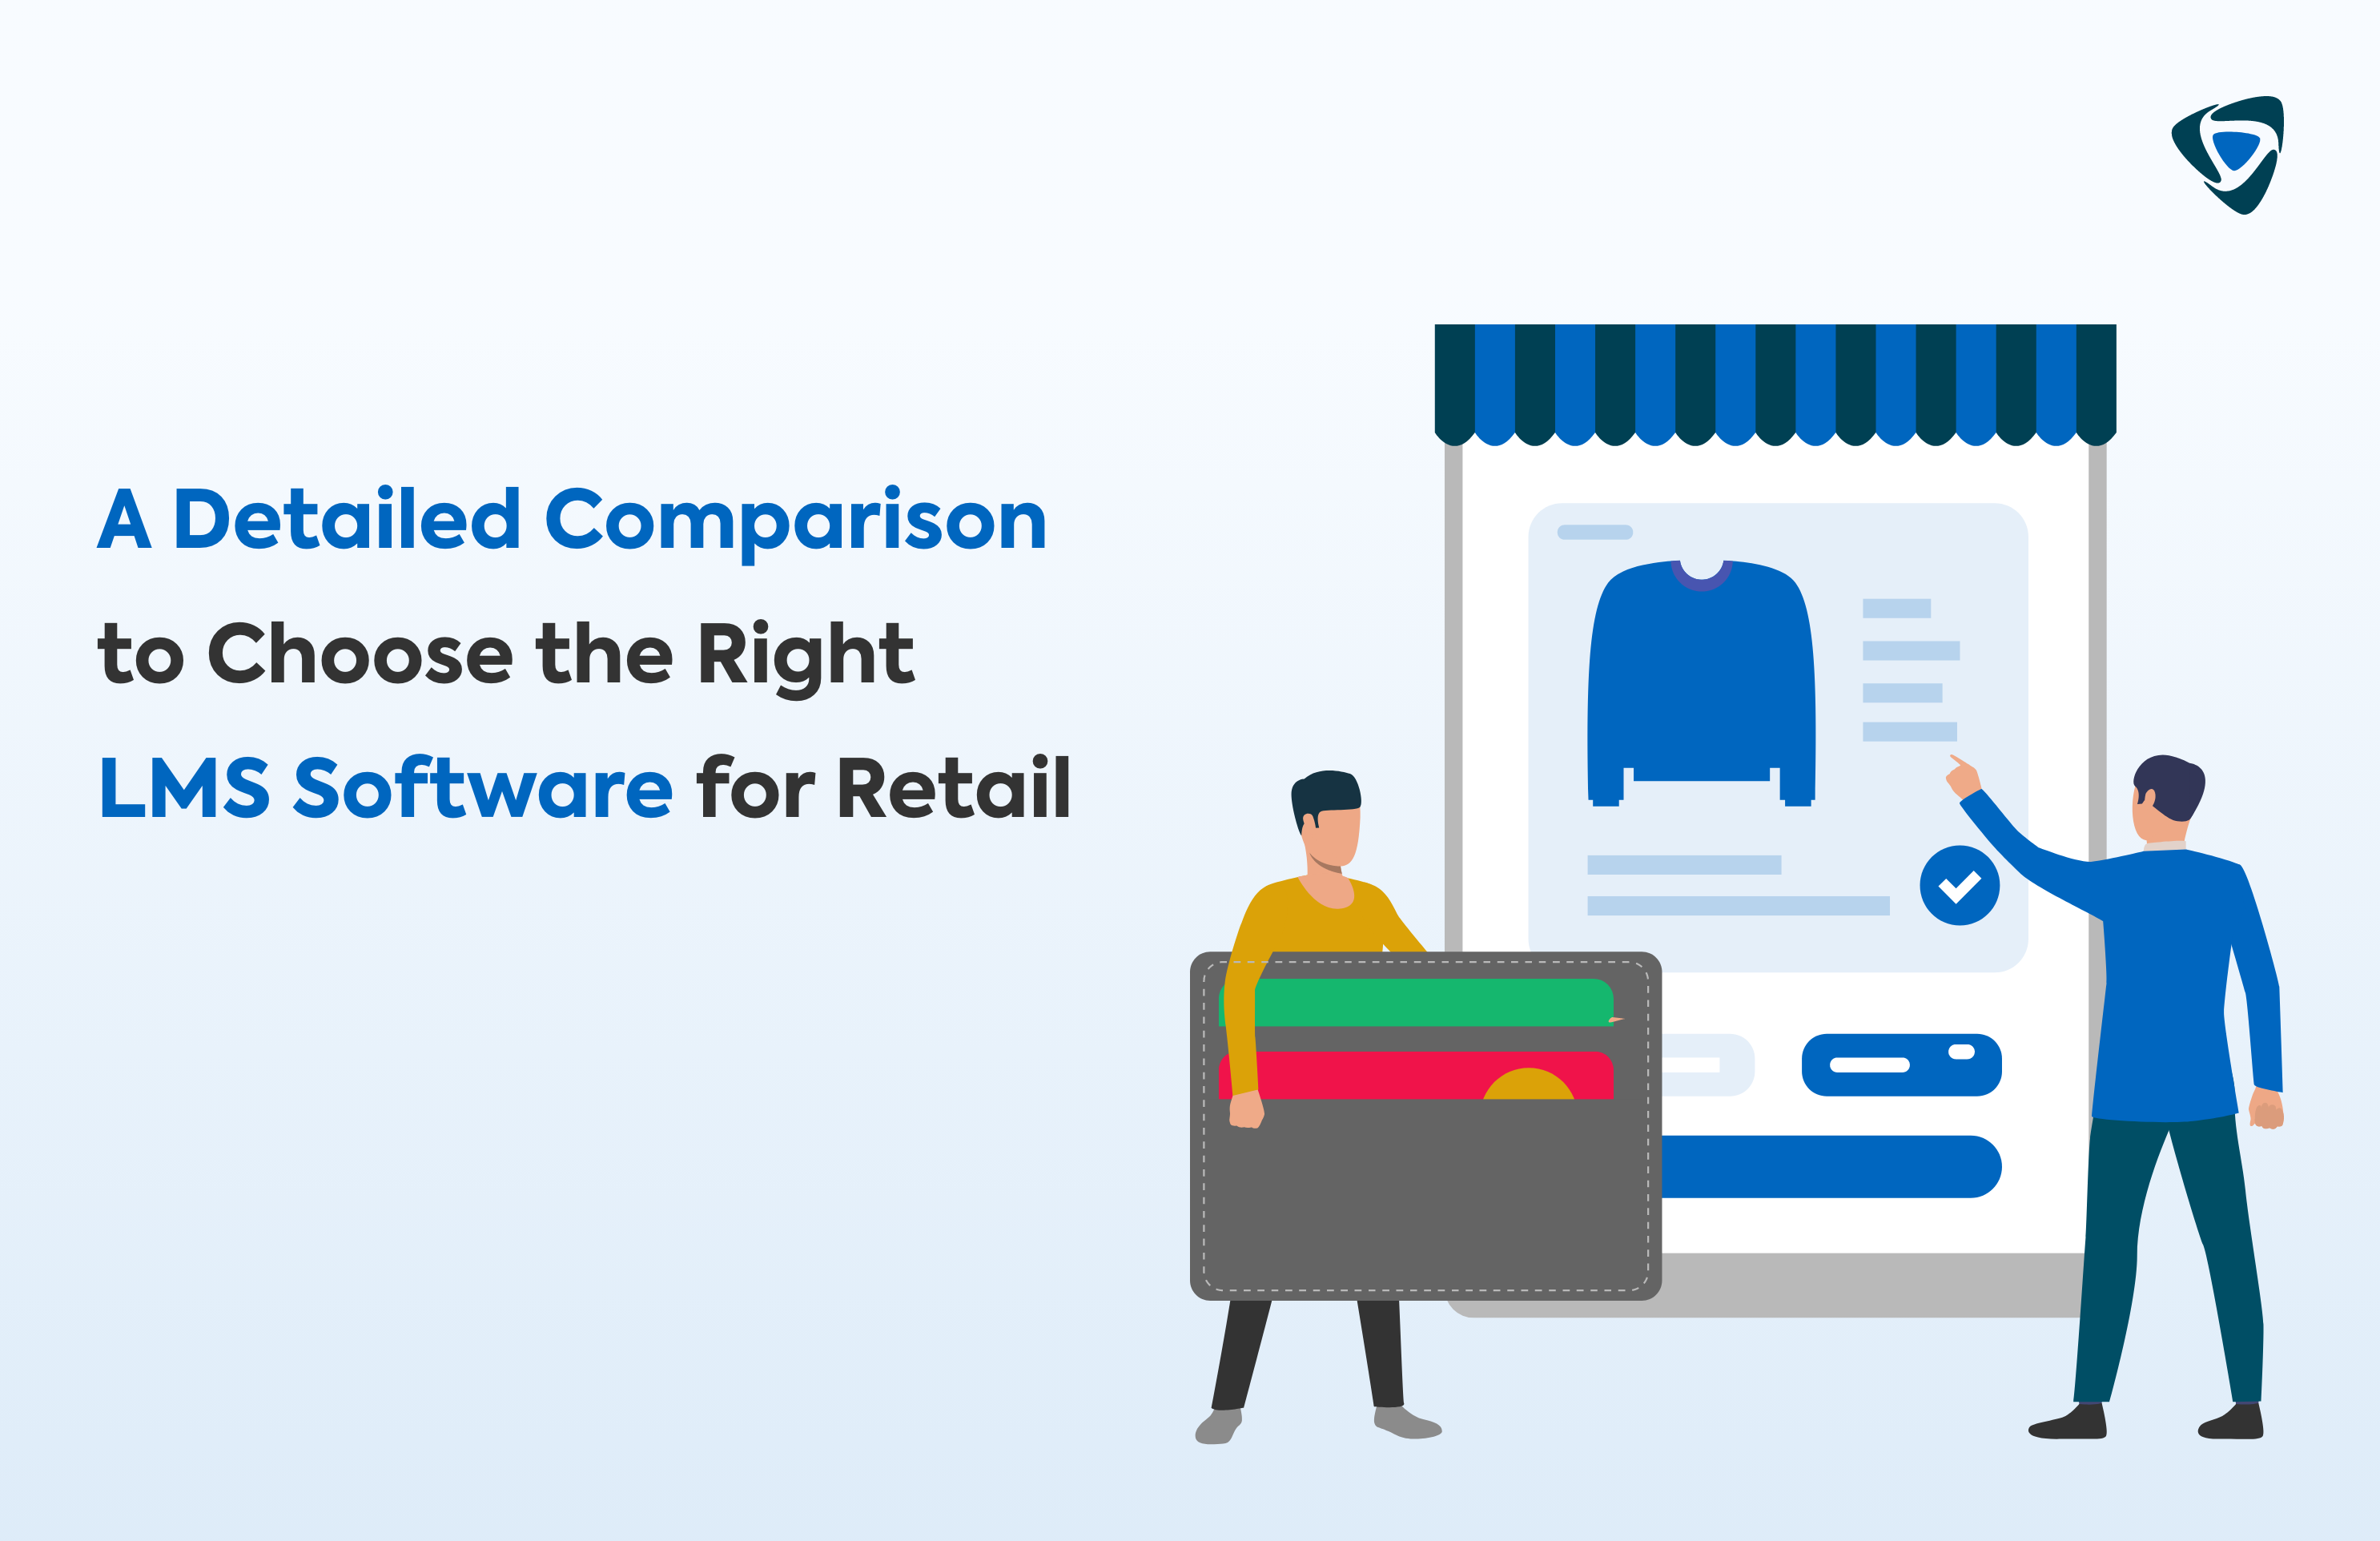 A Detailed Comparison to Choose the Right LMS Software for Retail